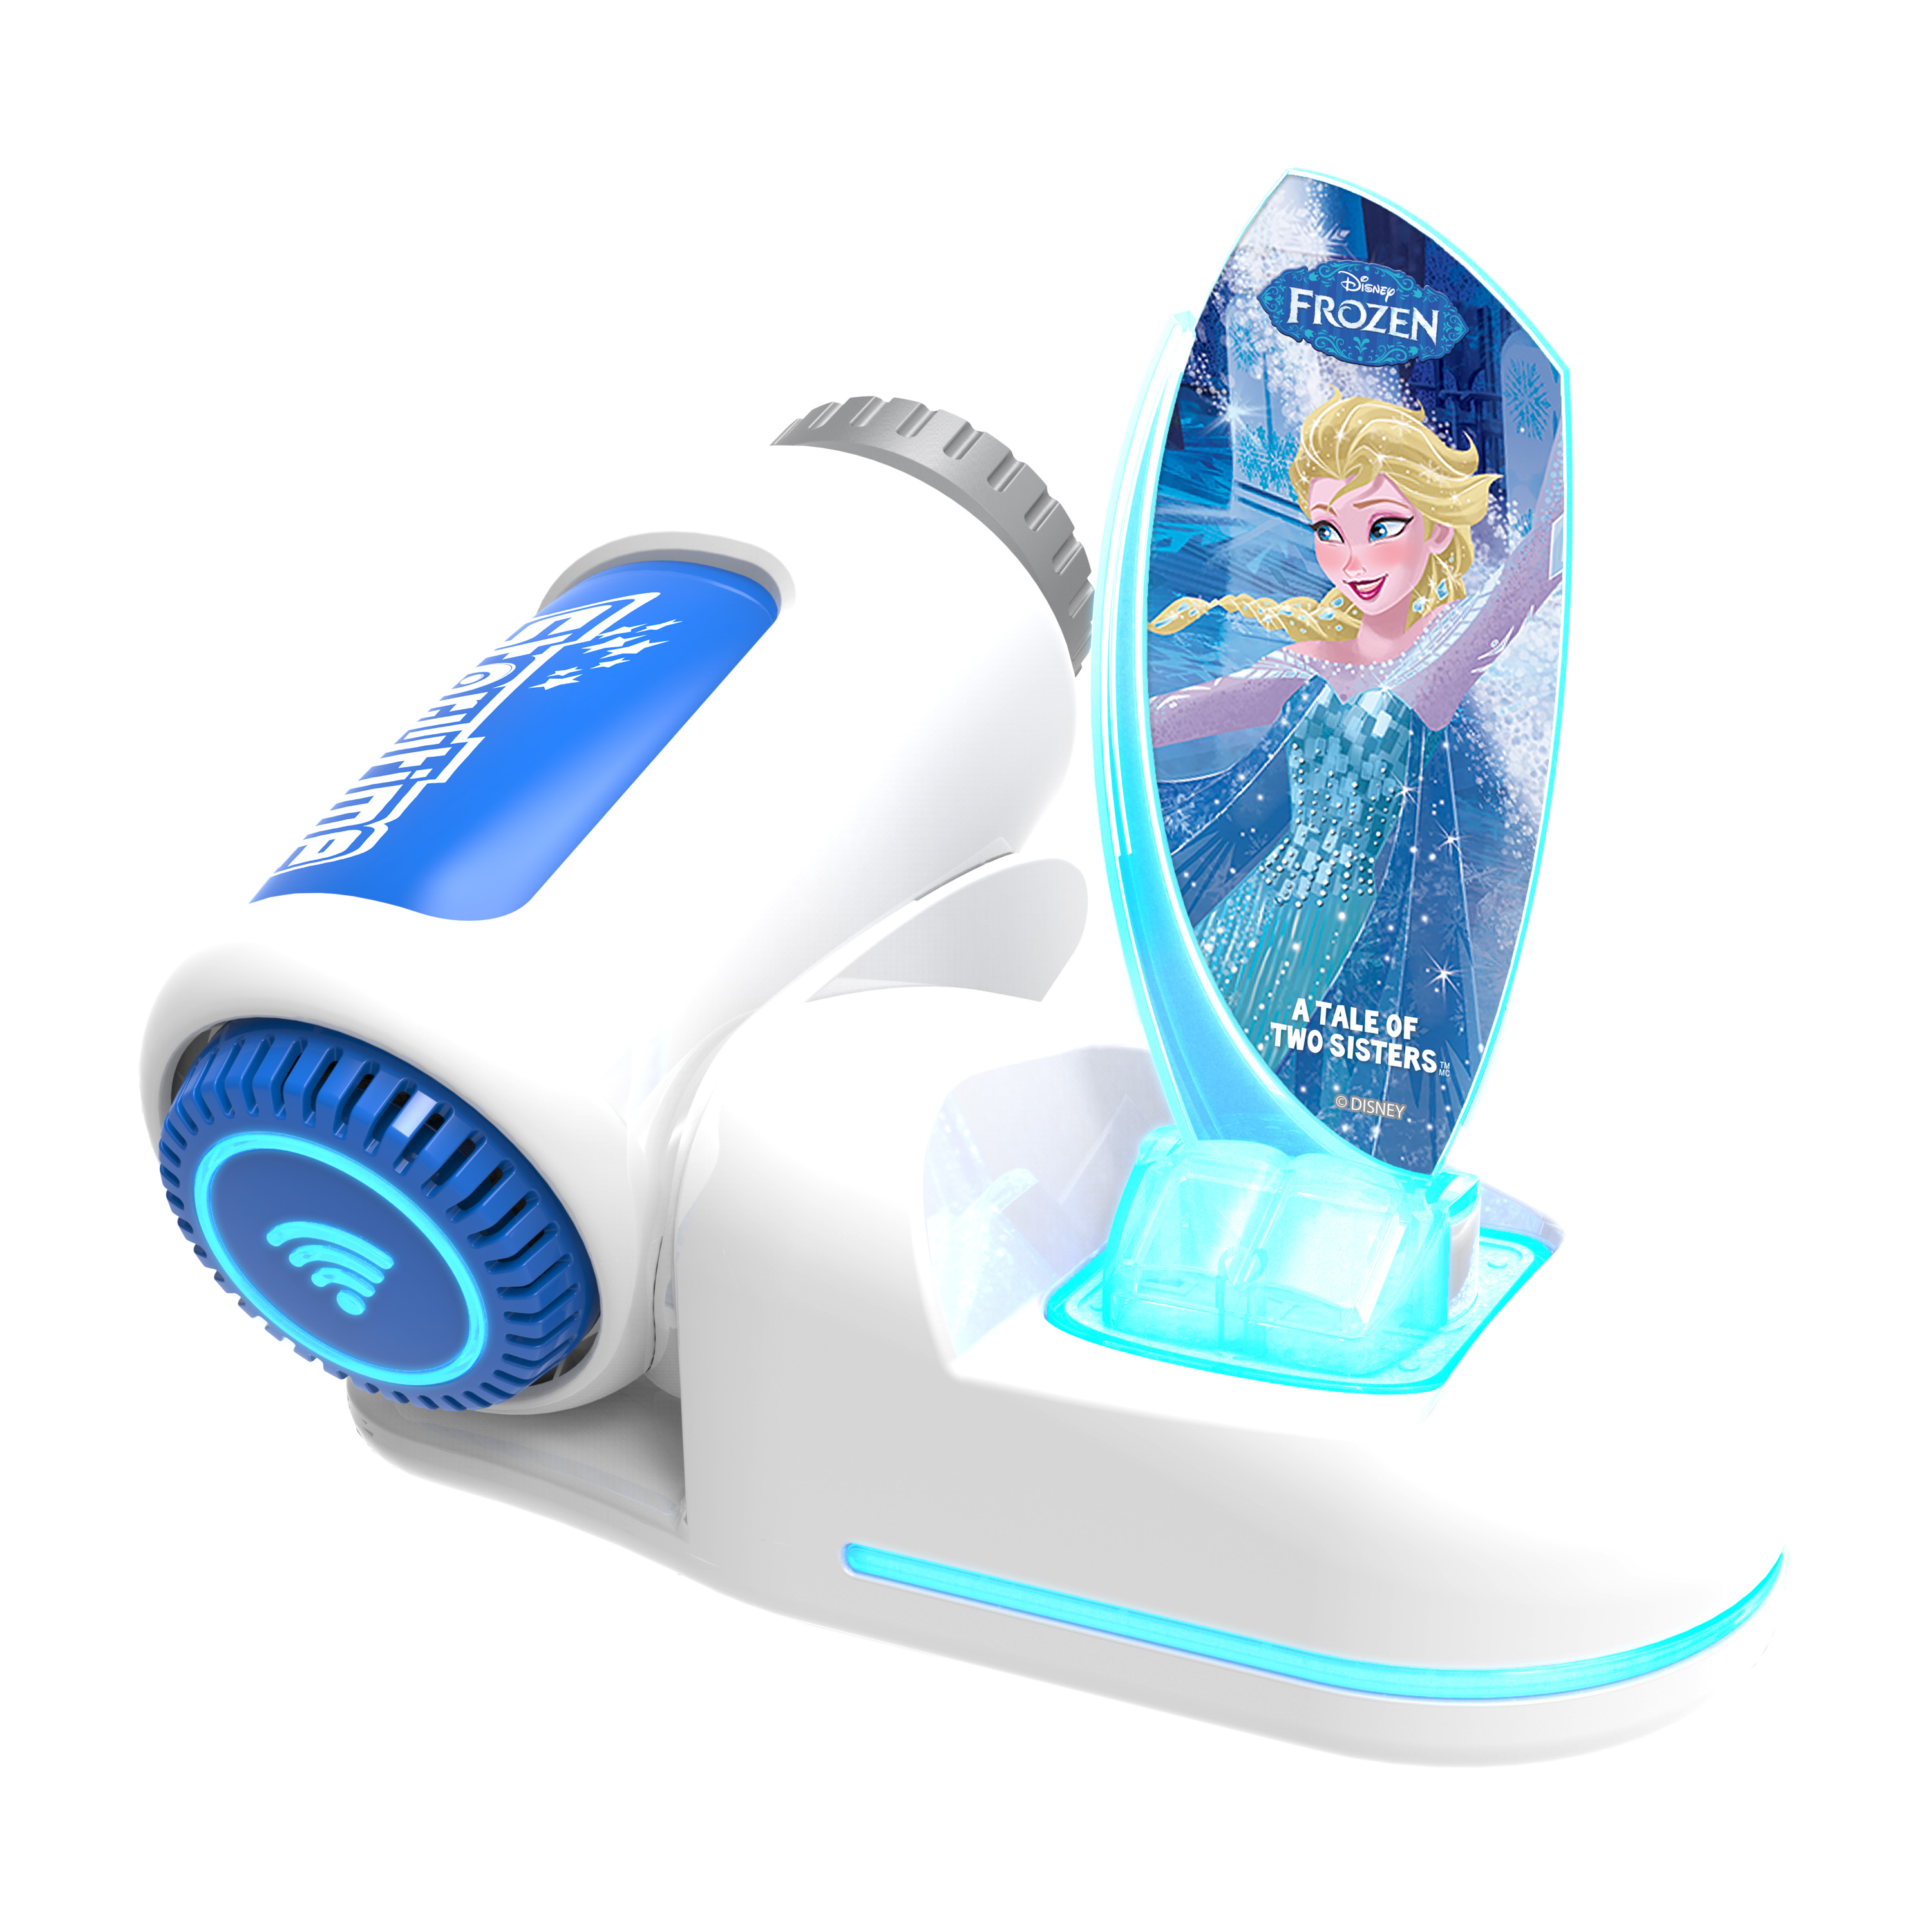 Storytime Theater Projector - Disney Frozen